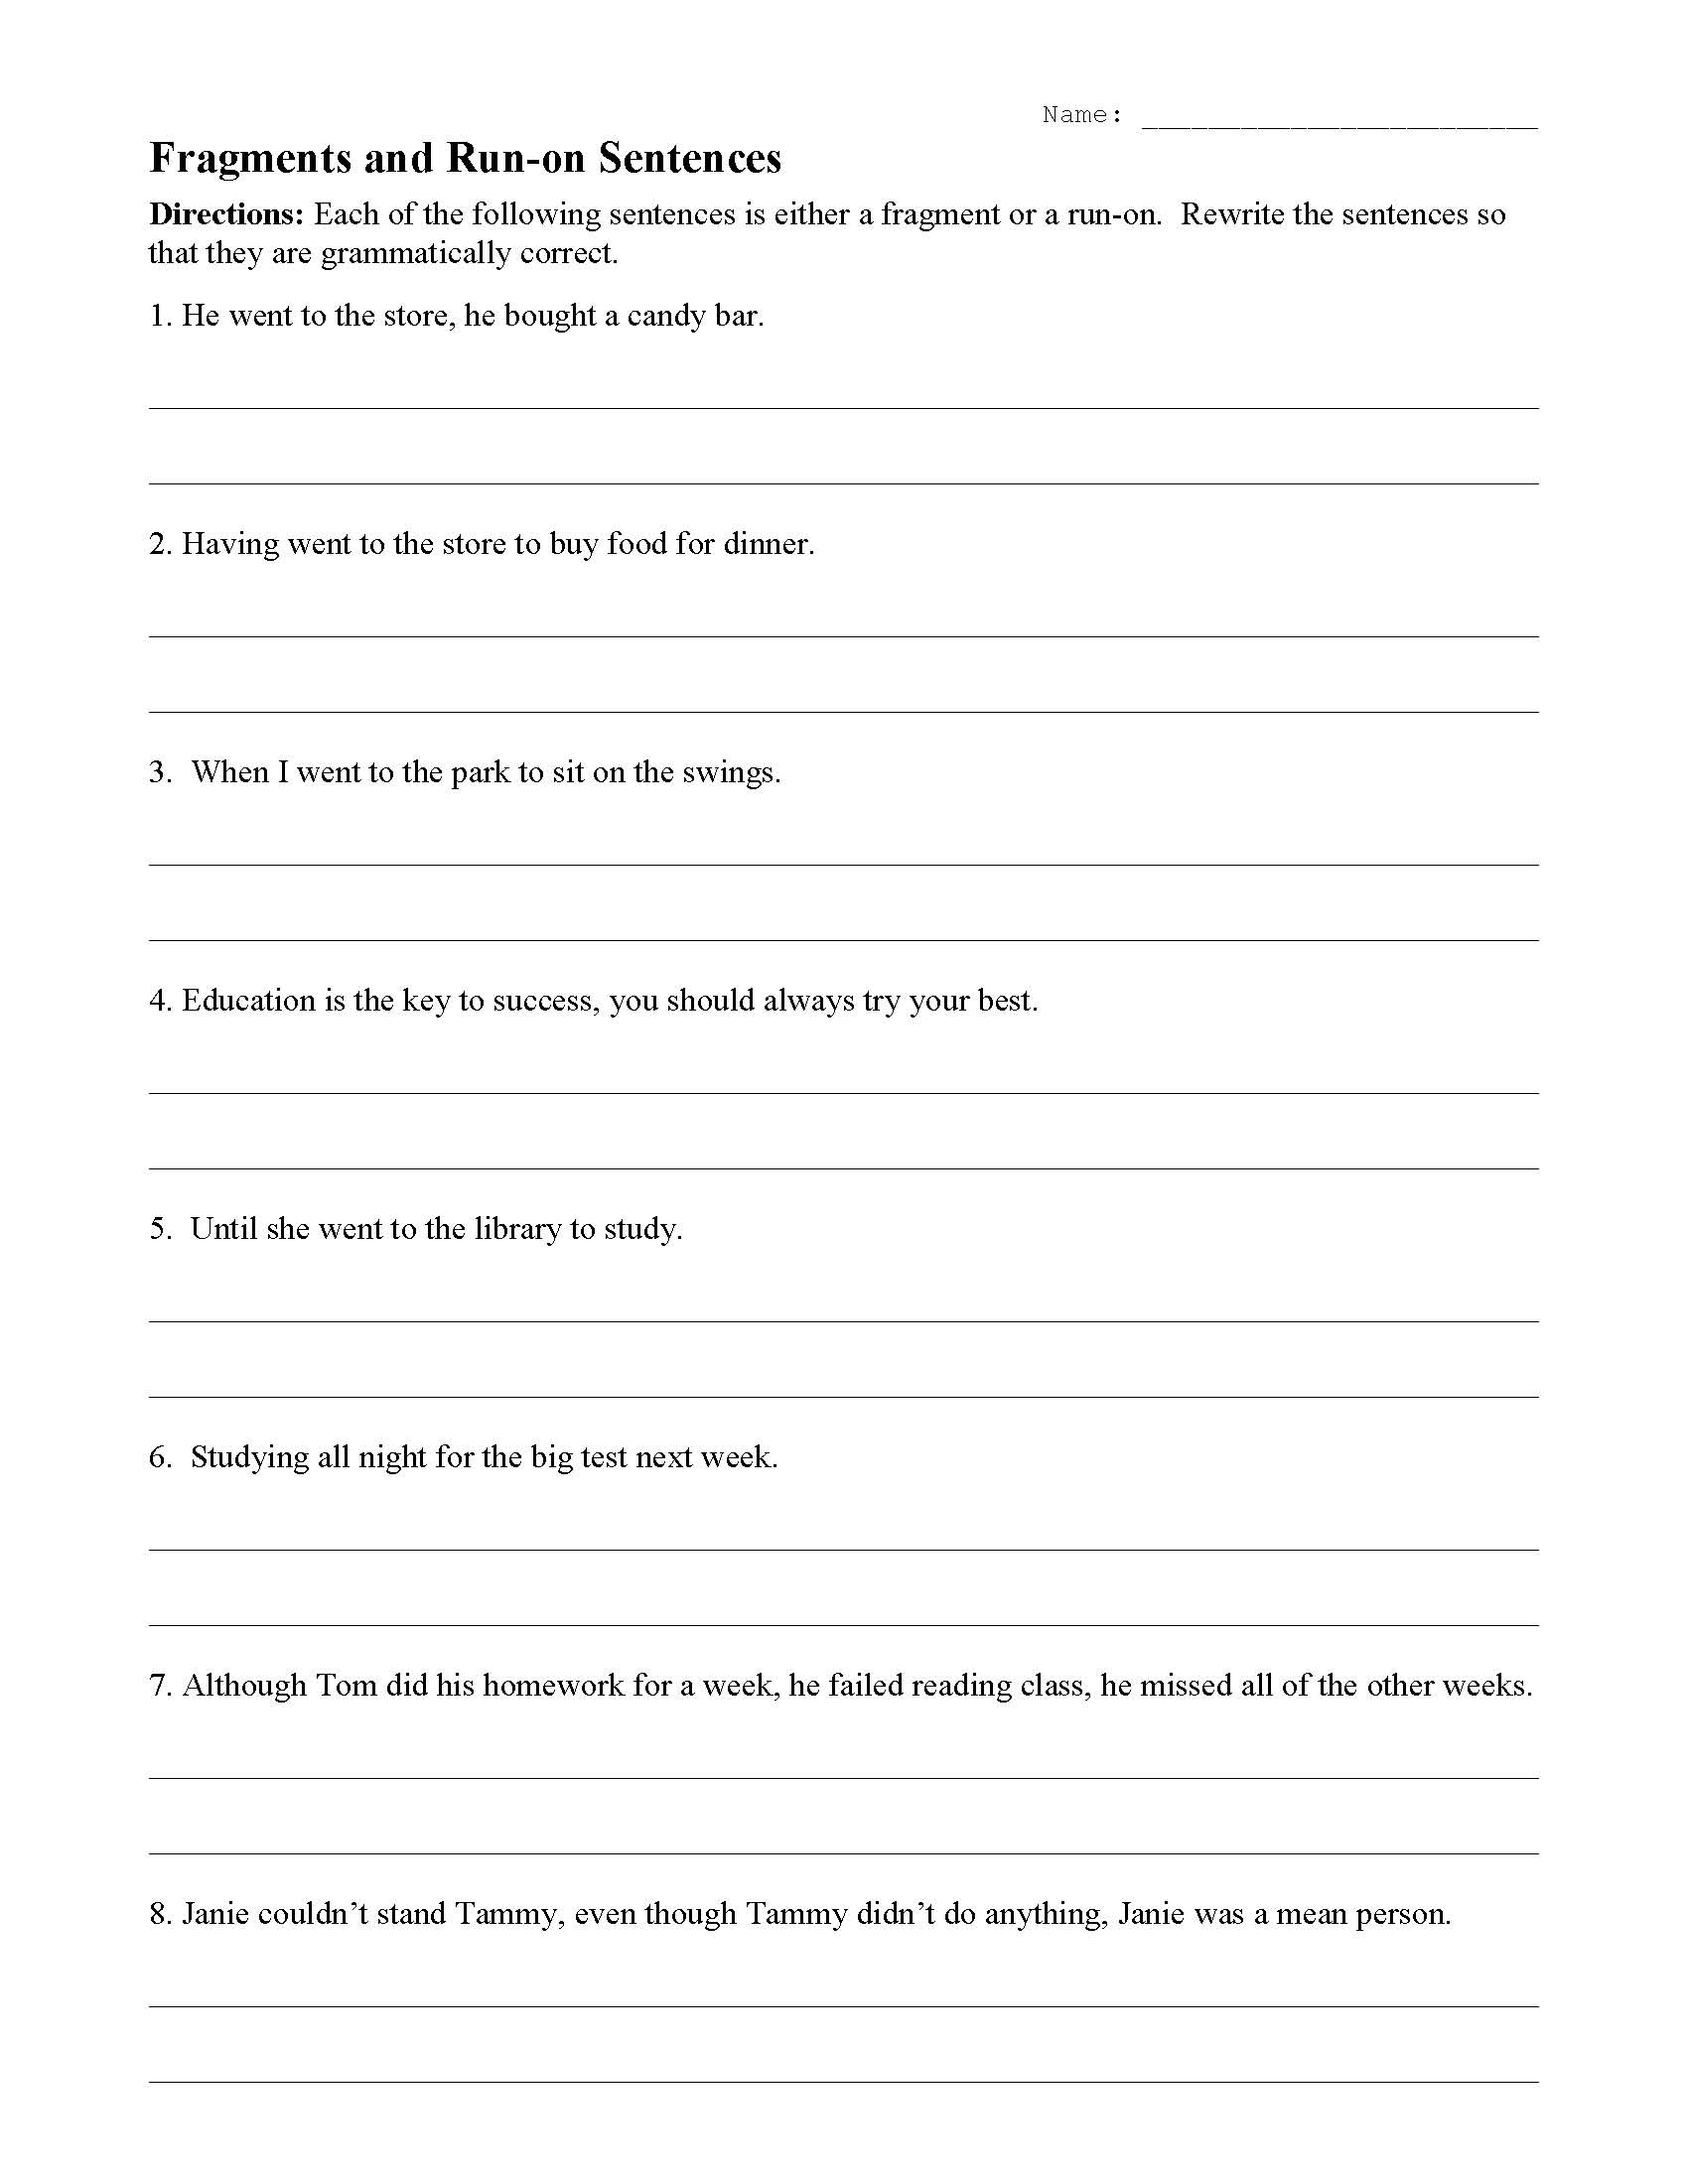 fragments-and-run-on-sentences-worksheet-sentence-structure-activity